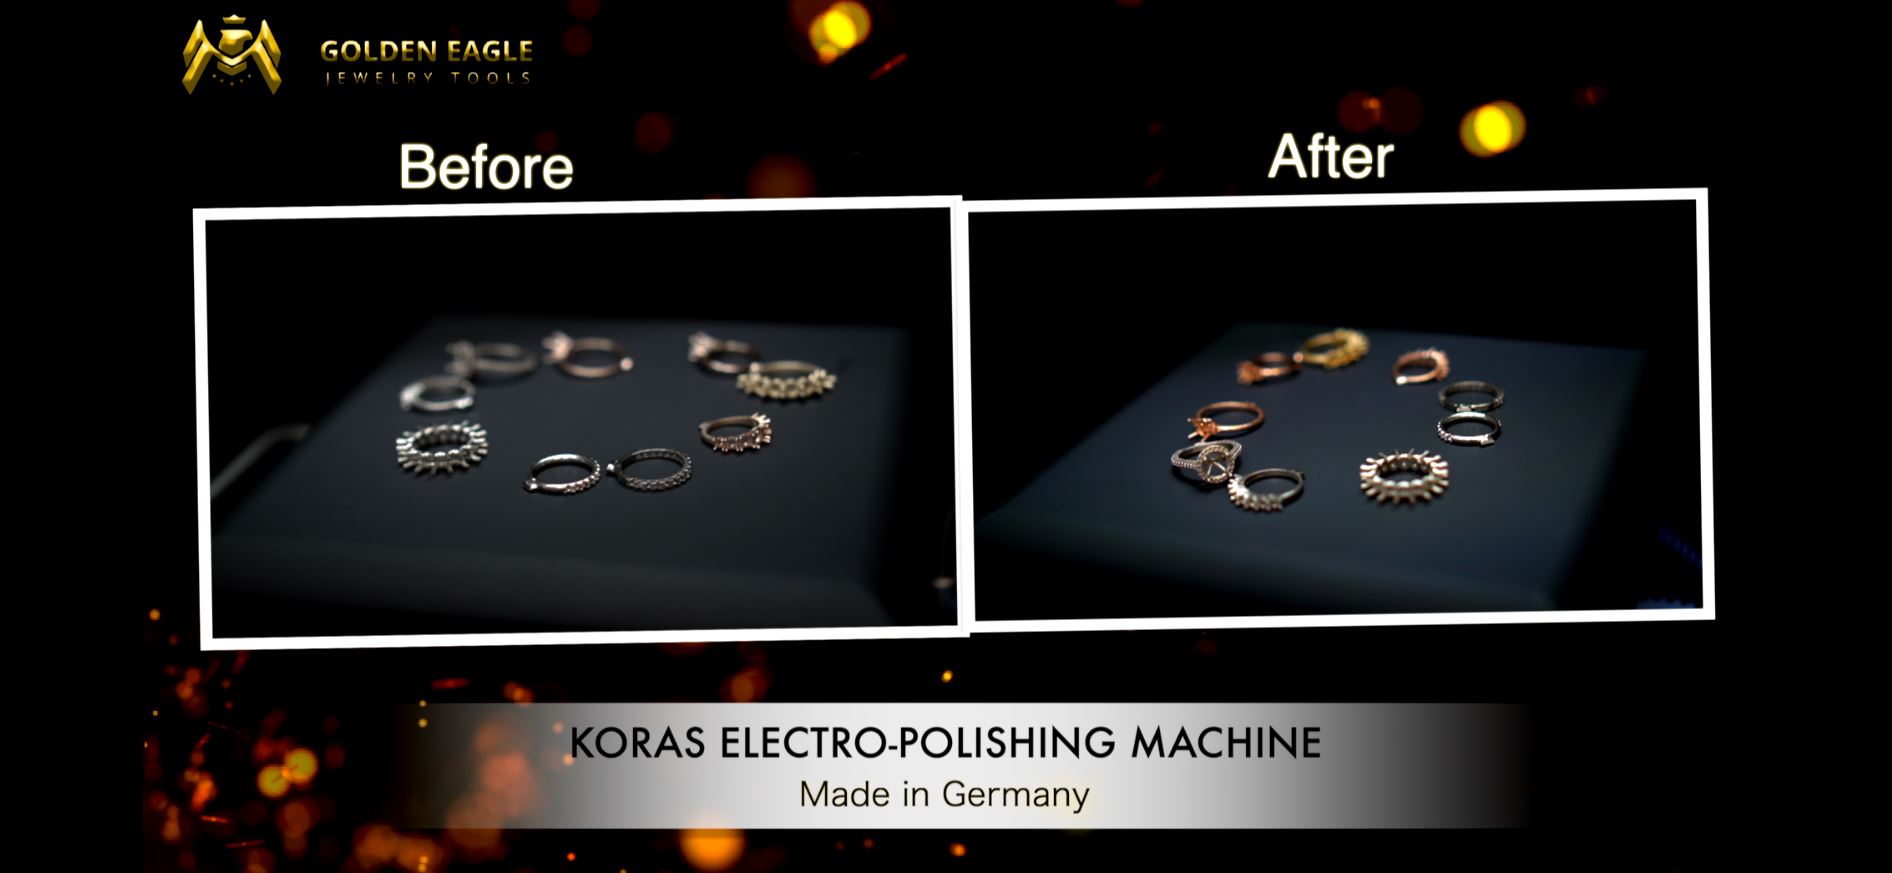 Load video: Koras Electro-polishing Machine - Polishes gold, silver, brass, bronze and stainless steel